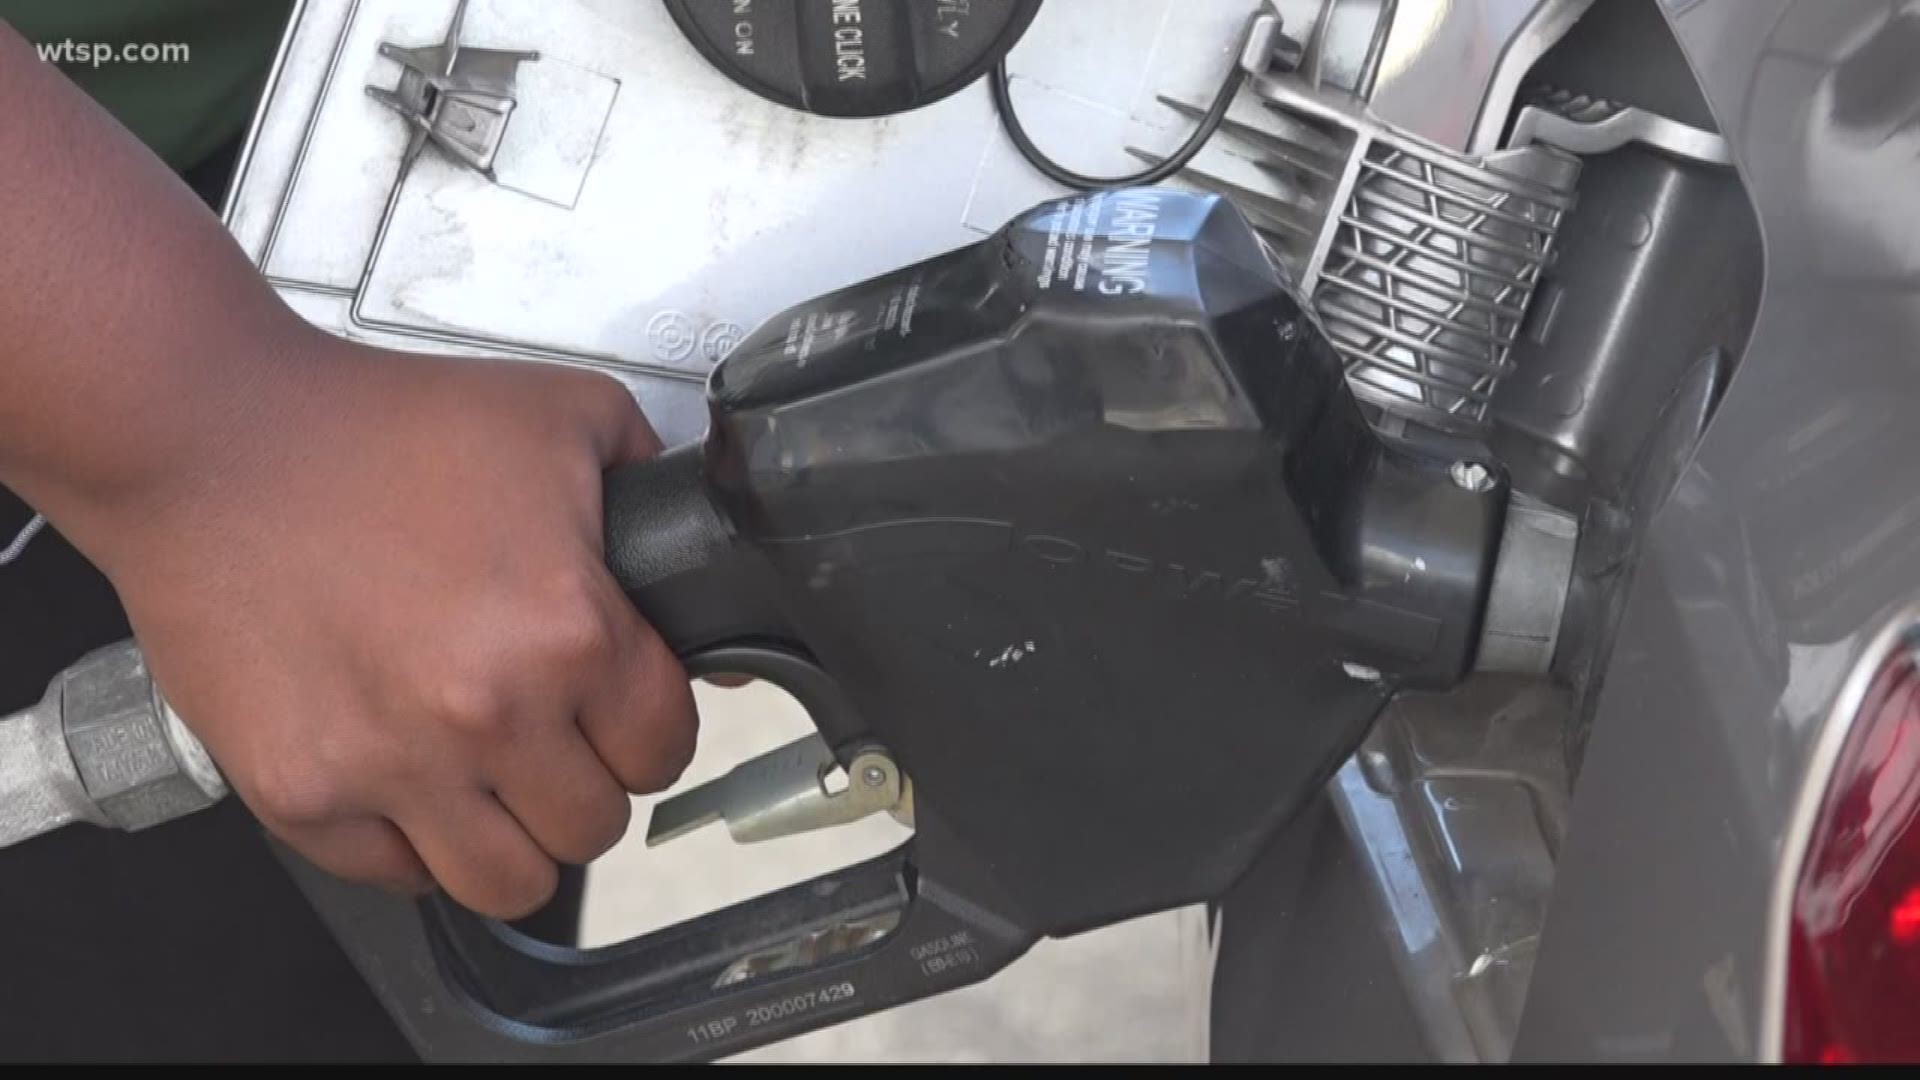 Gas prices just went down, but the price to fill up could spike for drivers in Hillsborough County.

There's talk about another tax to pay for our roads.

On Wednesday, Hillsborough County commissioners discussed raising the current 6-cent fuel tax an additional 5 cents. https://on.wtsp.com/2PohRUv